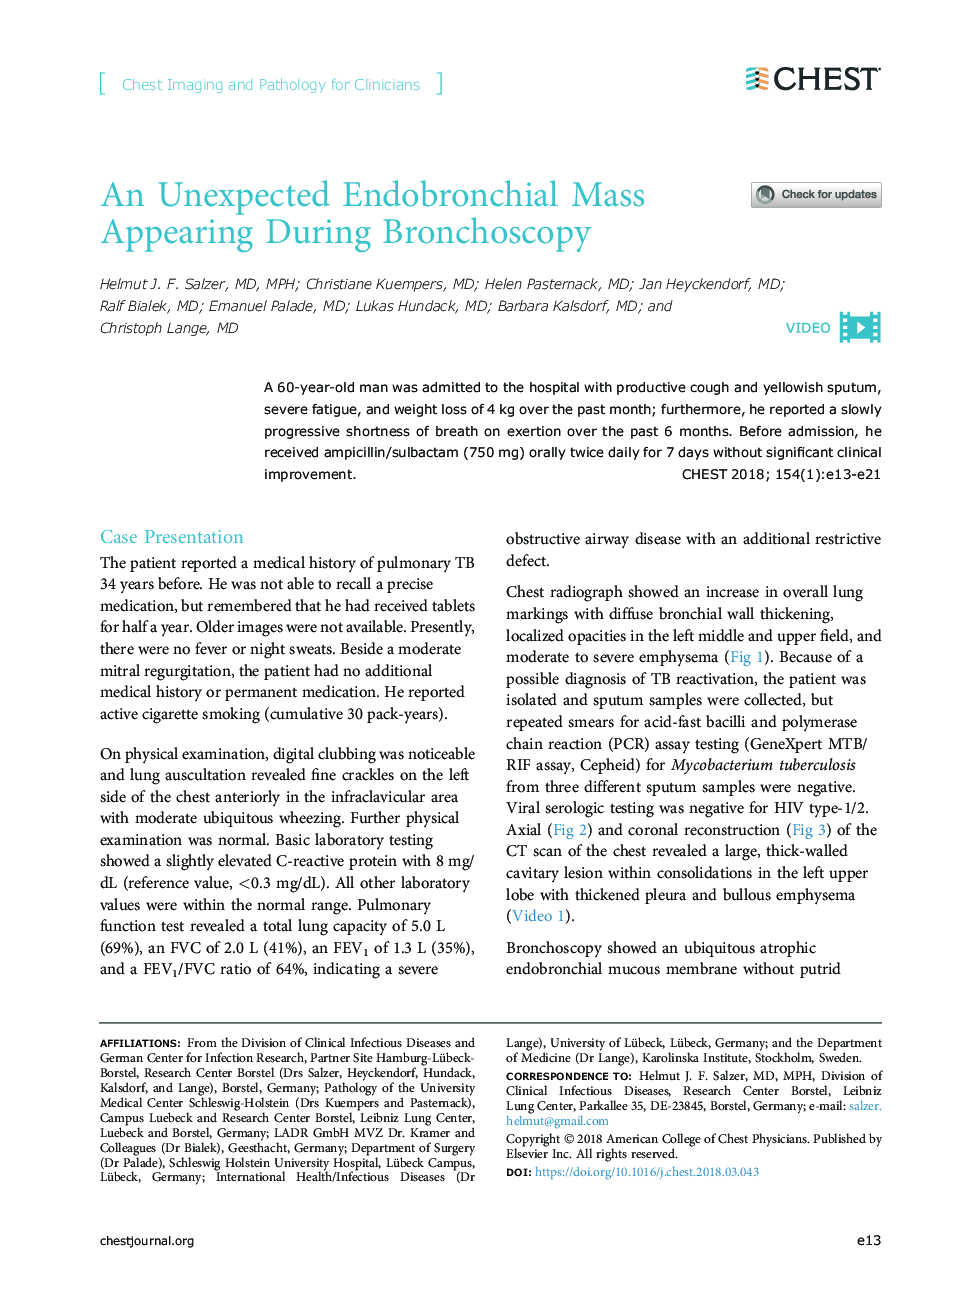 An Unexpected Endobronchial Mass Appearing During Bronchoscopy